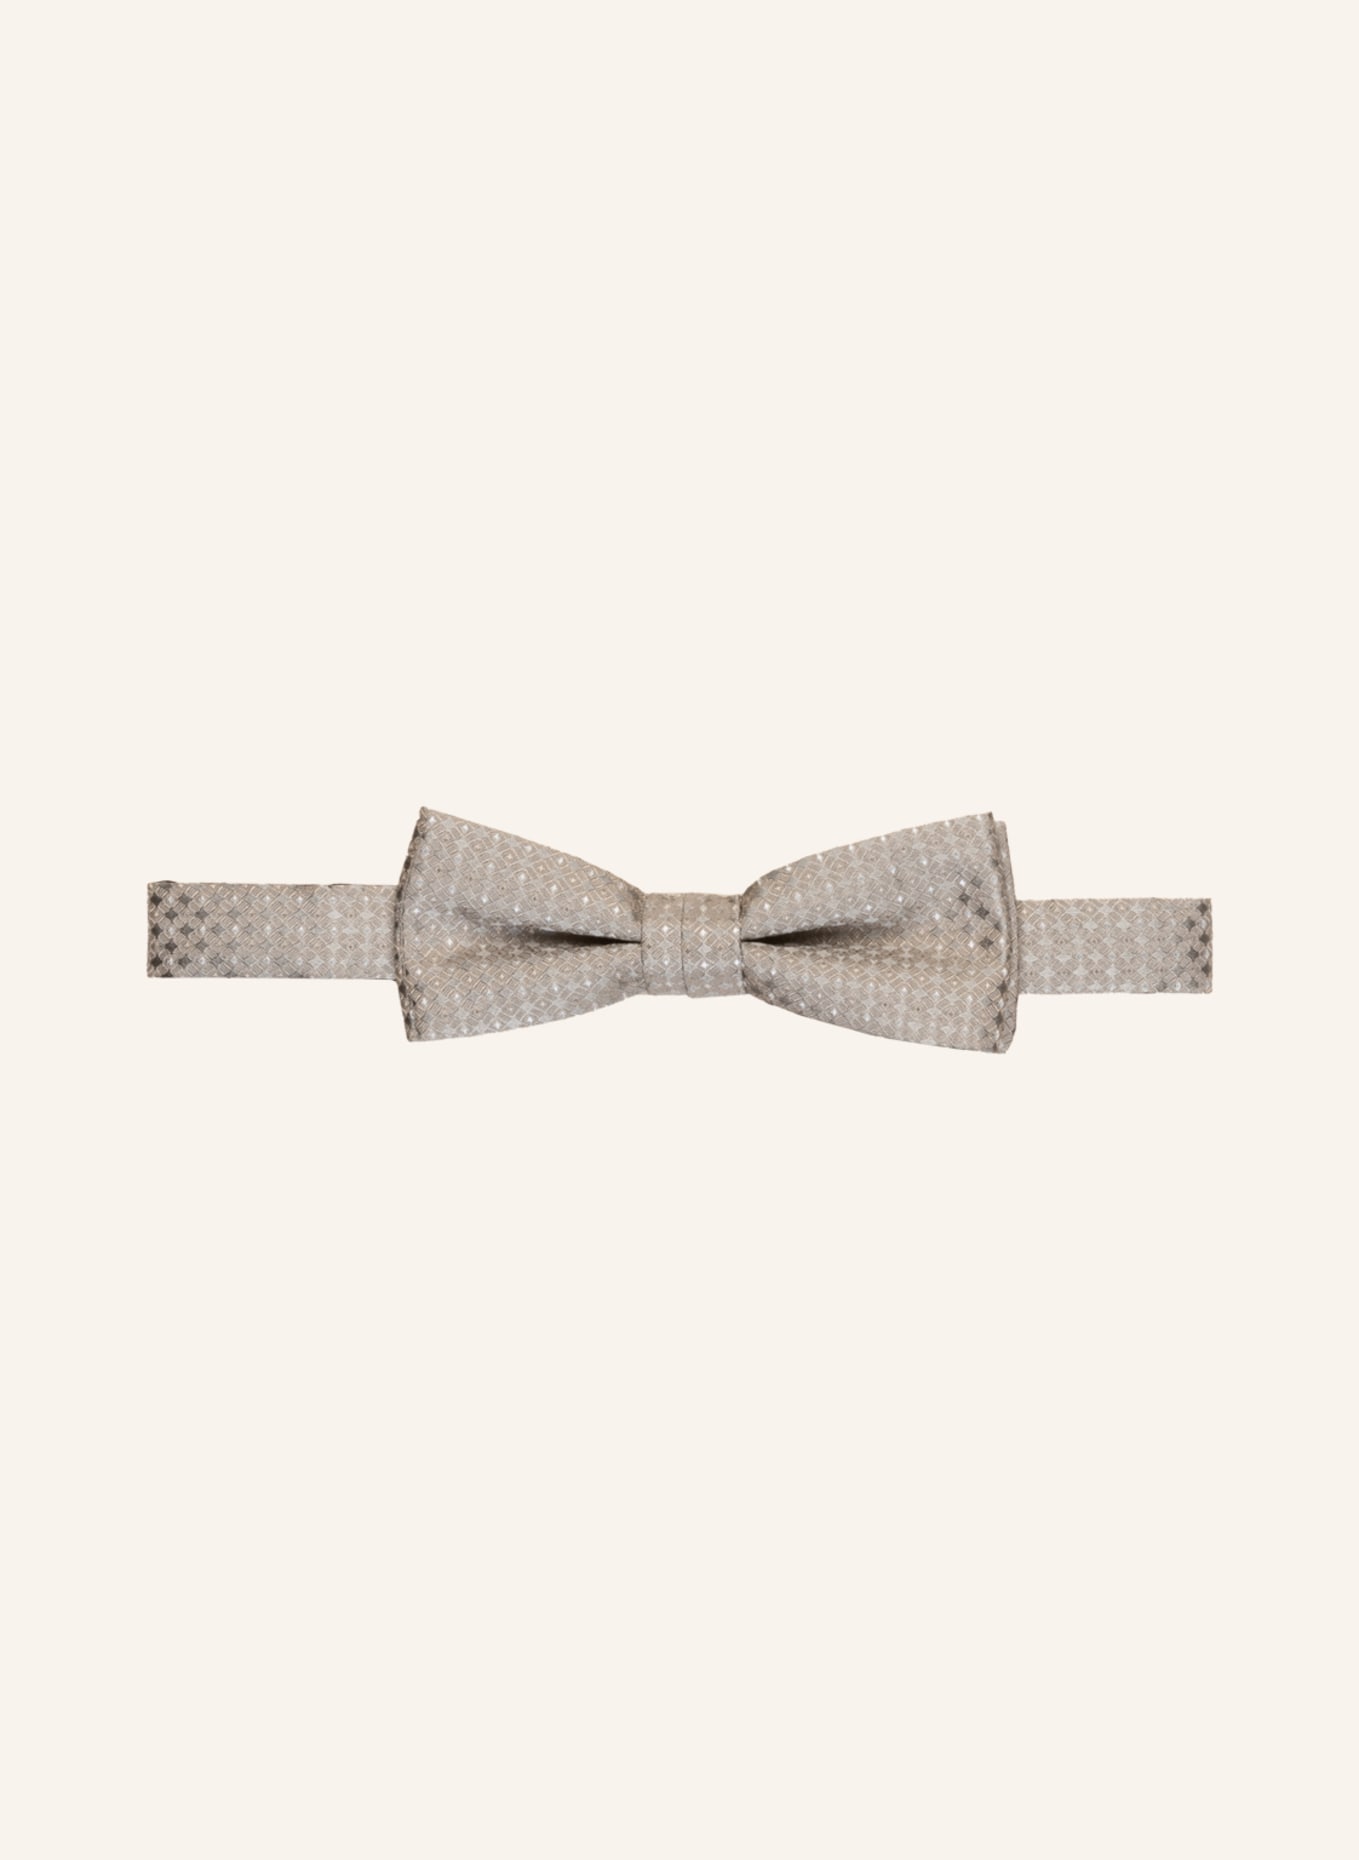 Bosa Pocket Square | by The Bow Tie Club